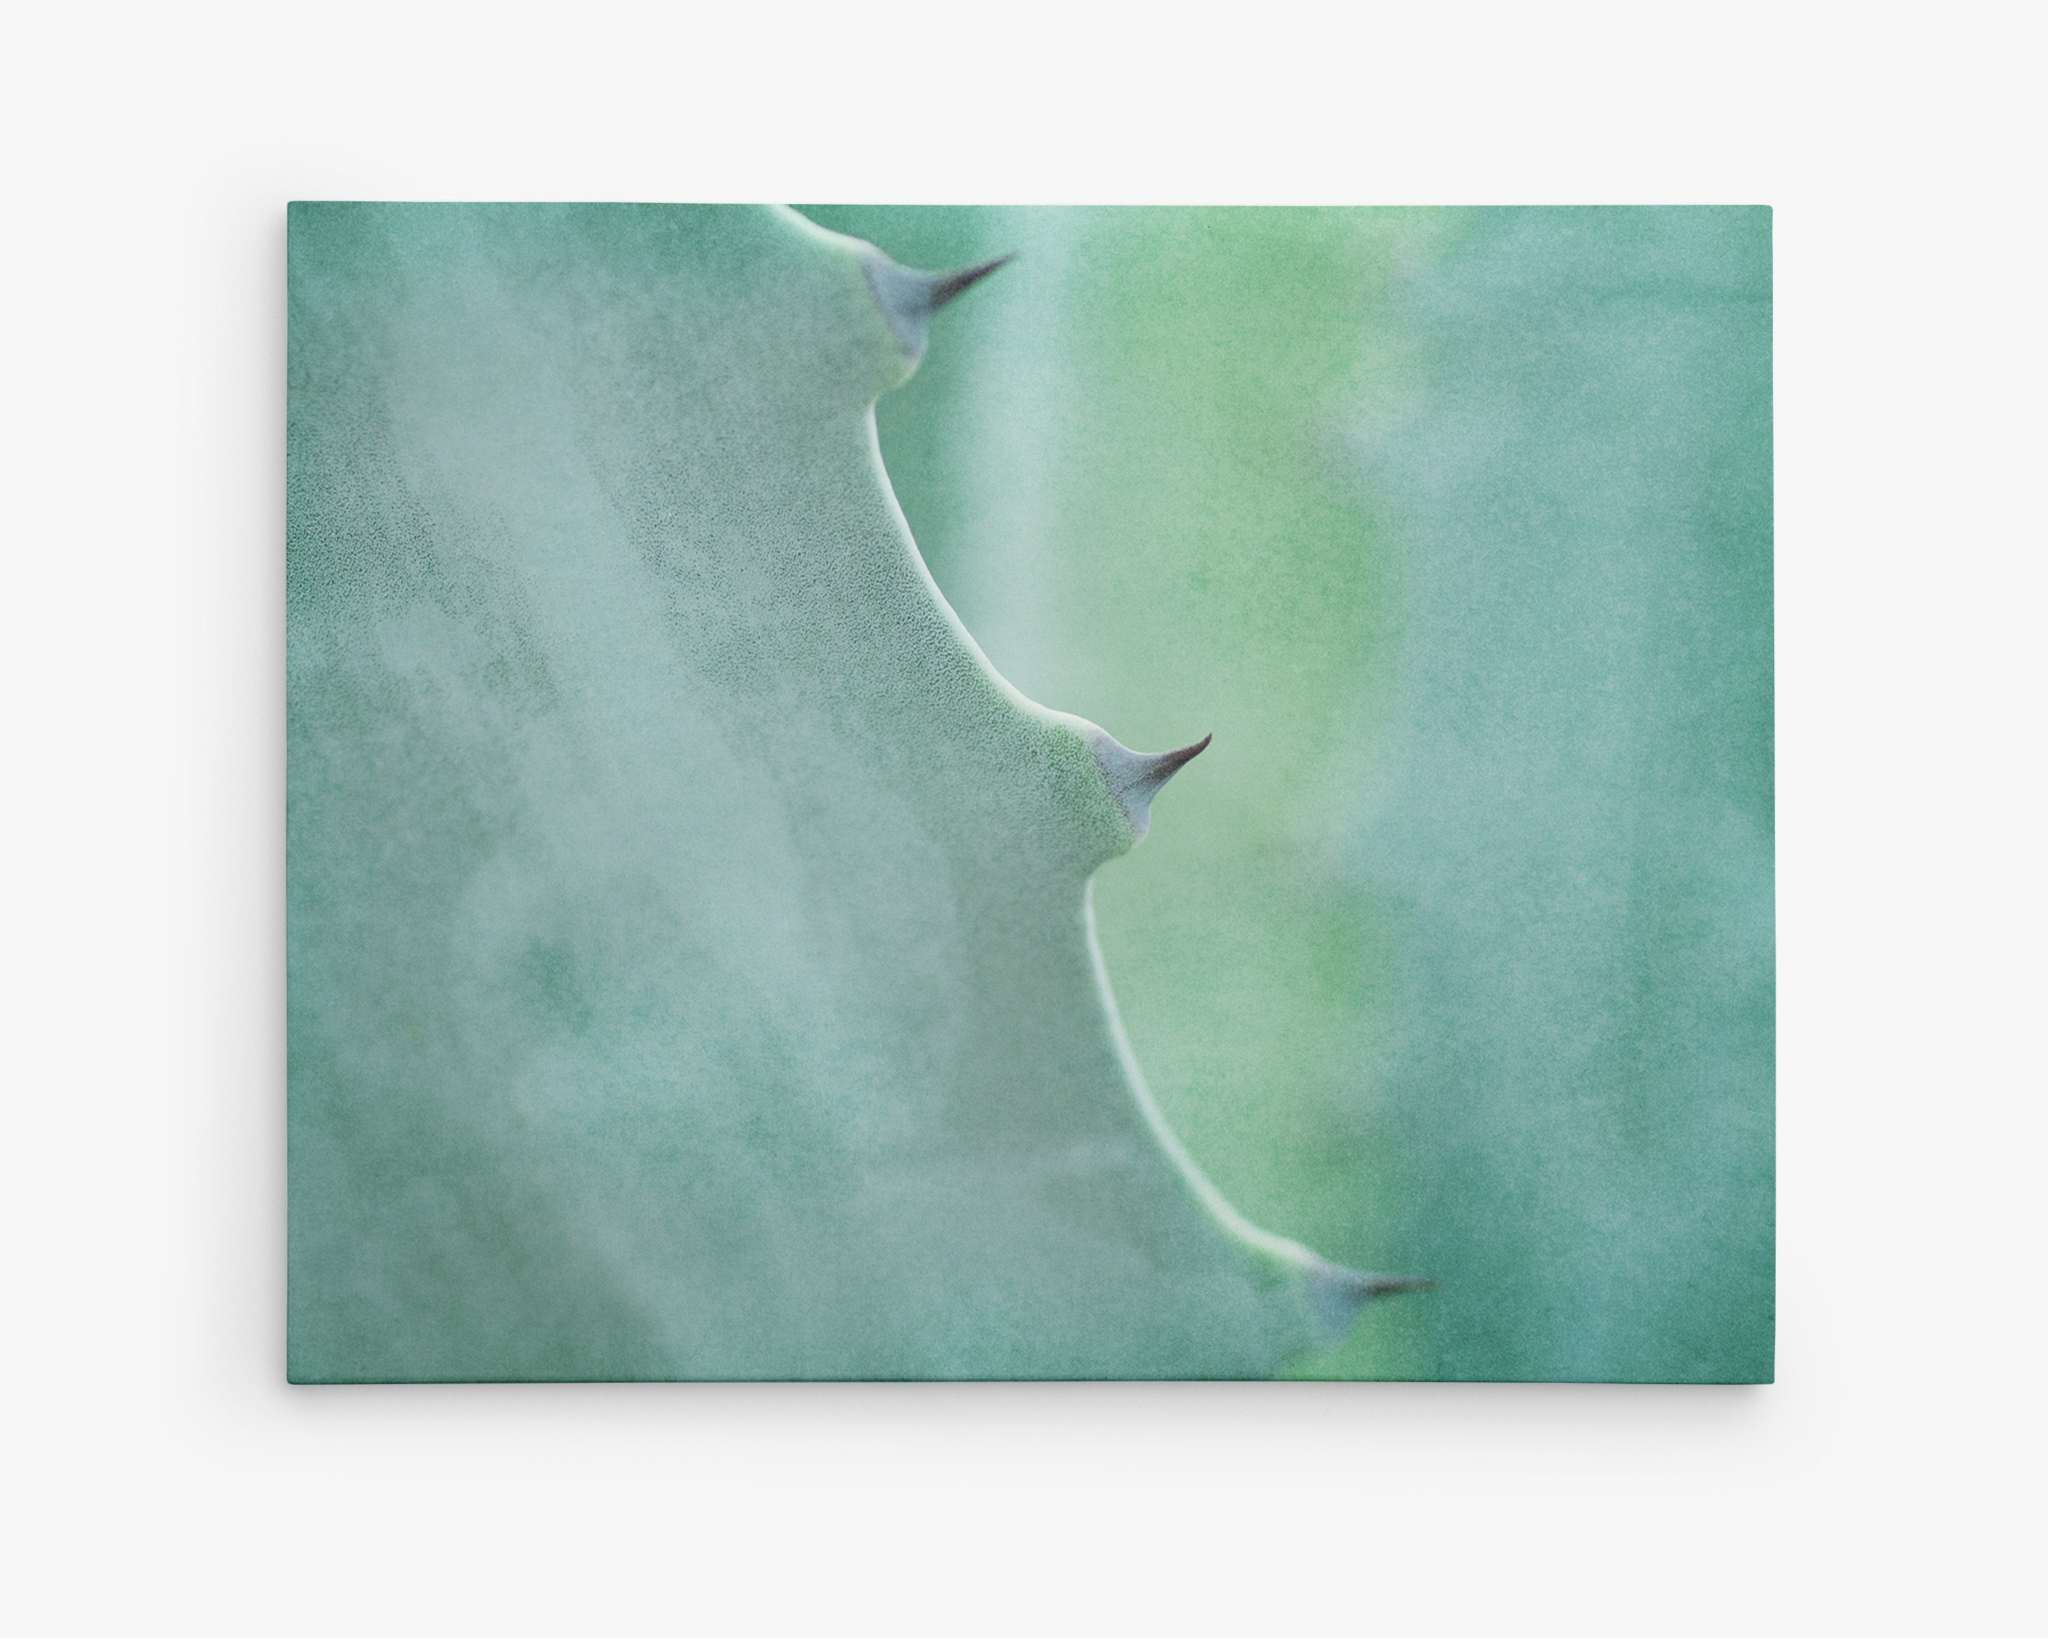 Close-up image of a green Aloe Vera plant showcasing its textured surface and thorny edges. The background is softly blurred, highlighting the intricate details of the plant’s structure as if displayed on a premium artist-grade canvas, Mint Green Botanical Wall Art, 'Aloe Vera Spikes' by Offley Green.